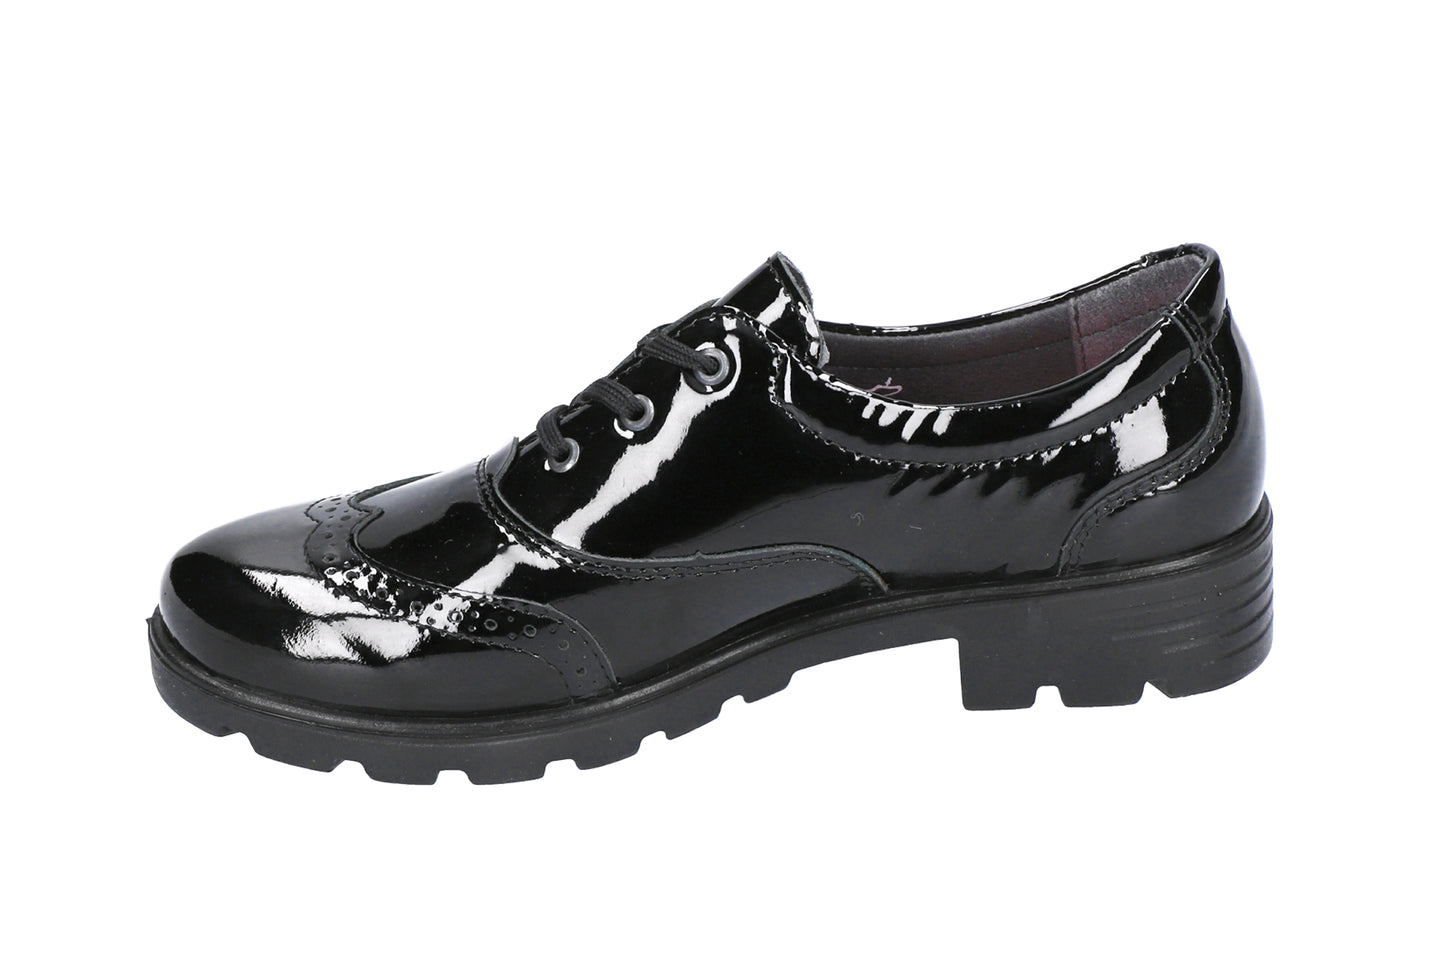 Lucy Black Patent Leather Lace-up Girls Shoe